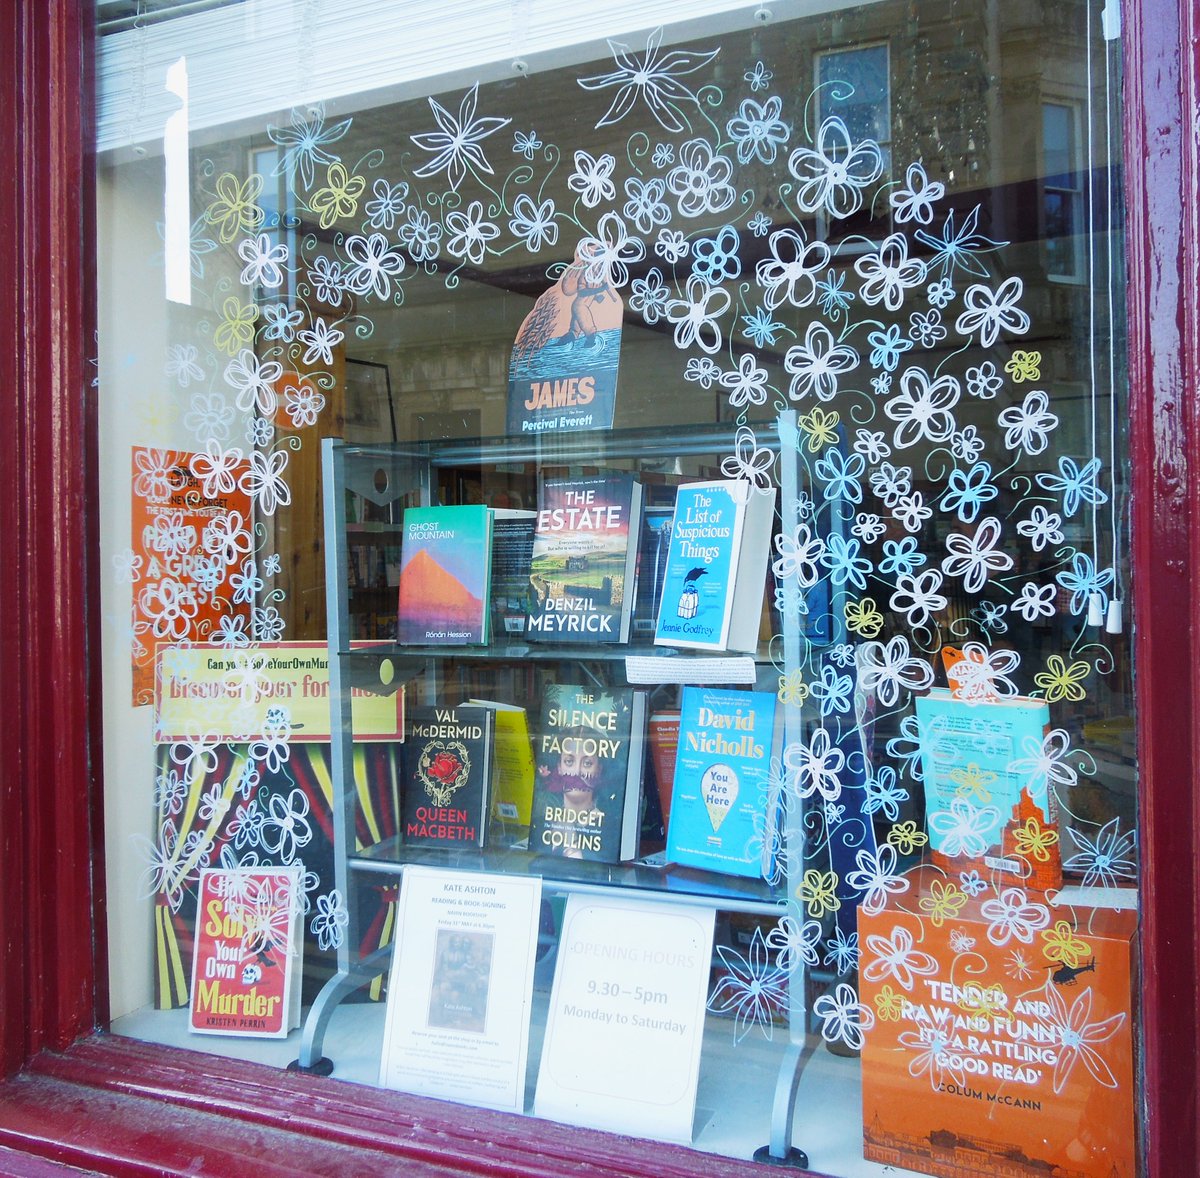 It's very dusty in #Nairn today! But our beautiful books are behind glass, so they're protected better than most of us! #GhostMountain & #TheListOfSuspiciousThings are my picks here. But *all* of these are superb reads: see them & more of our favourites at uk.bookshop.org/shop/nairnbooks